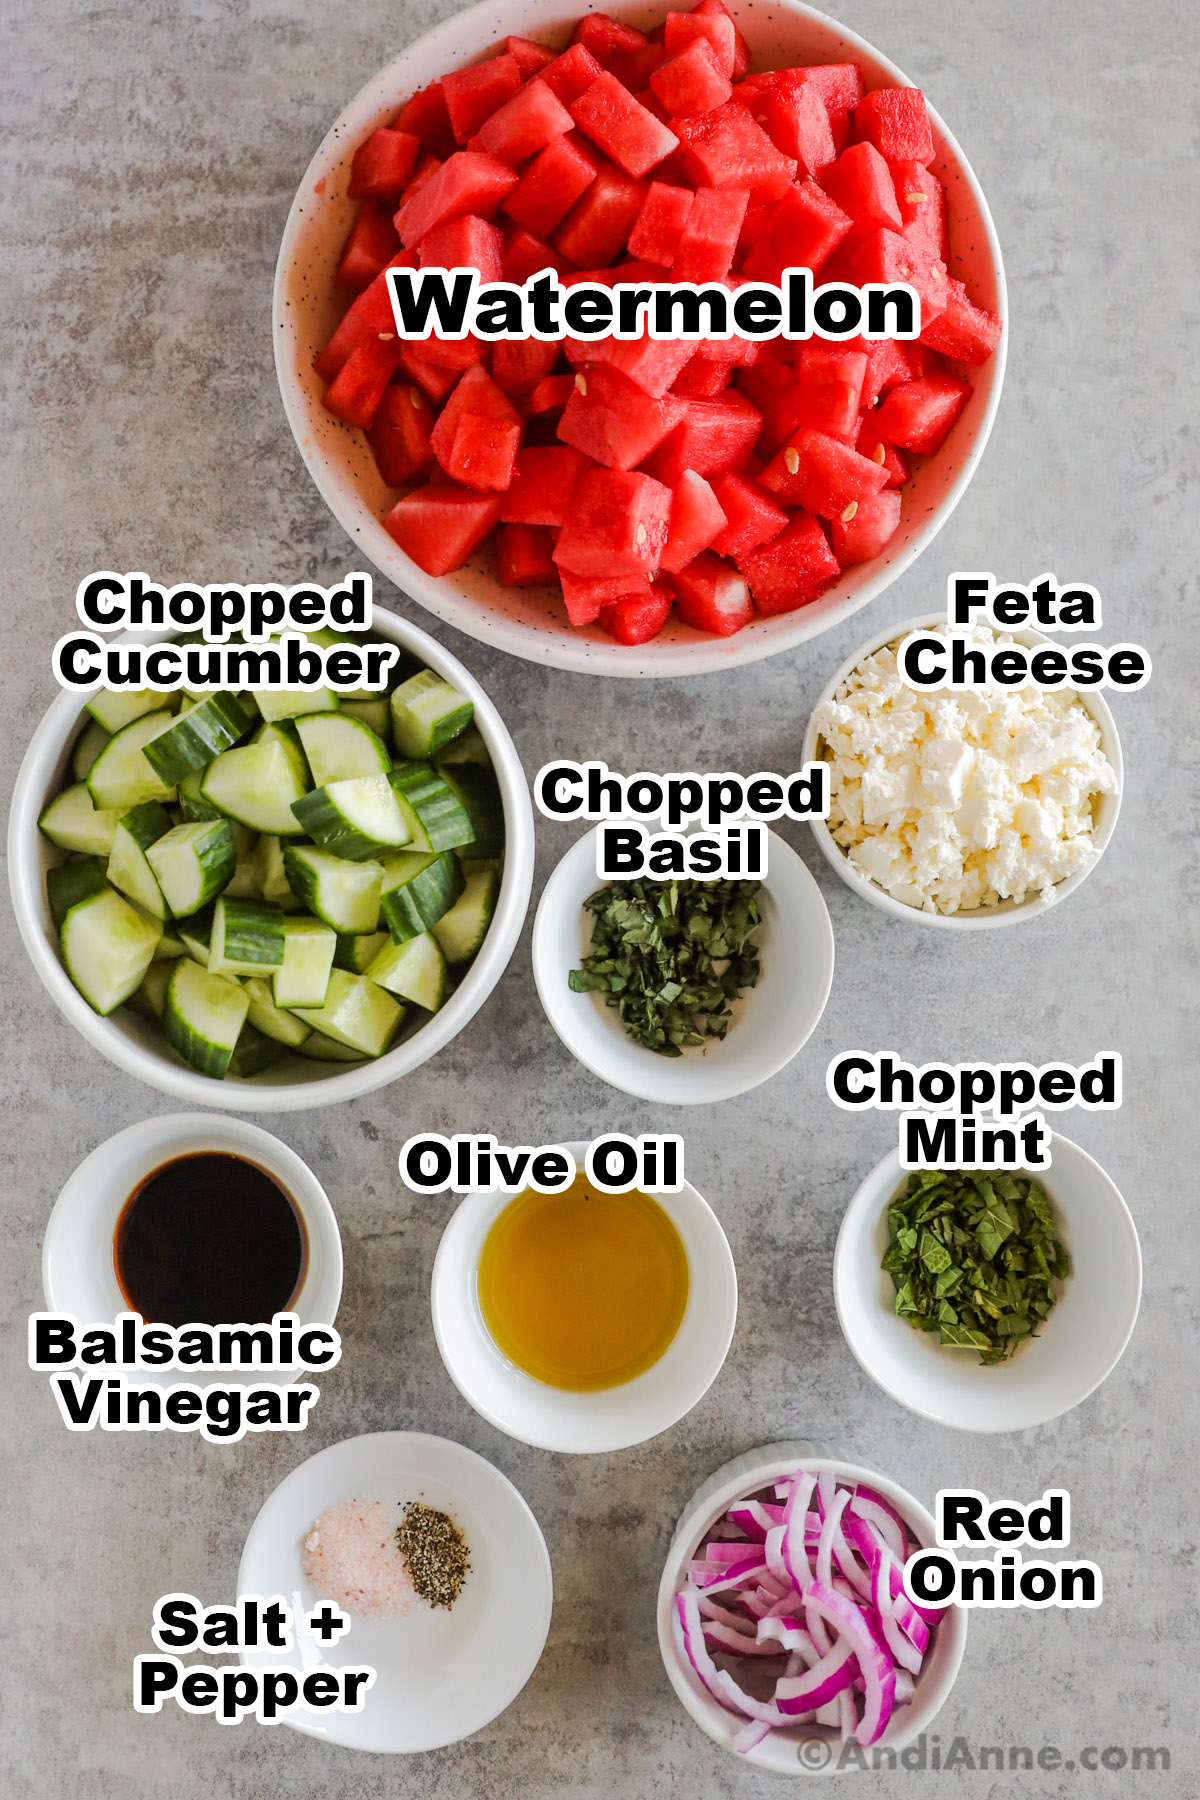 Recipe ingredients in bowls including cubed watermelon, chopped cucumber, feta cheese, chopped basil and mint, balsamic vinegar, olive oil, and red onion.